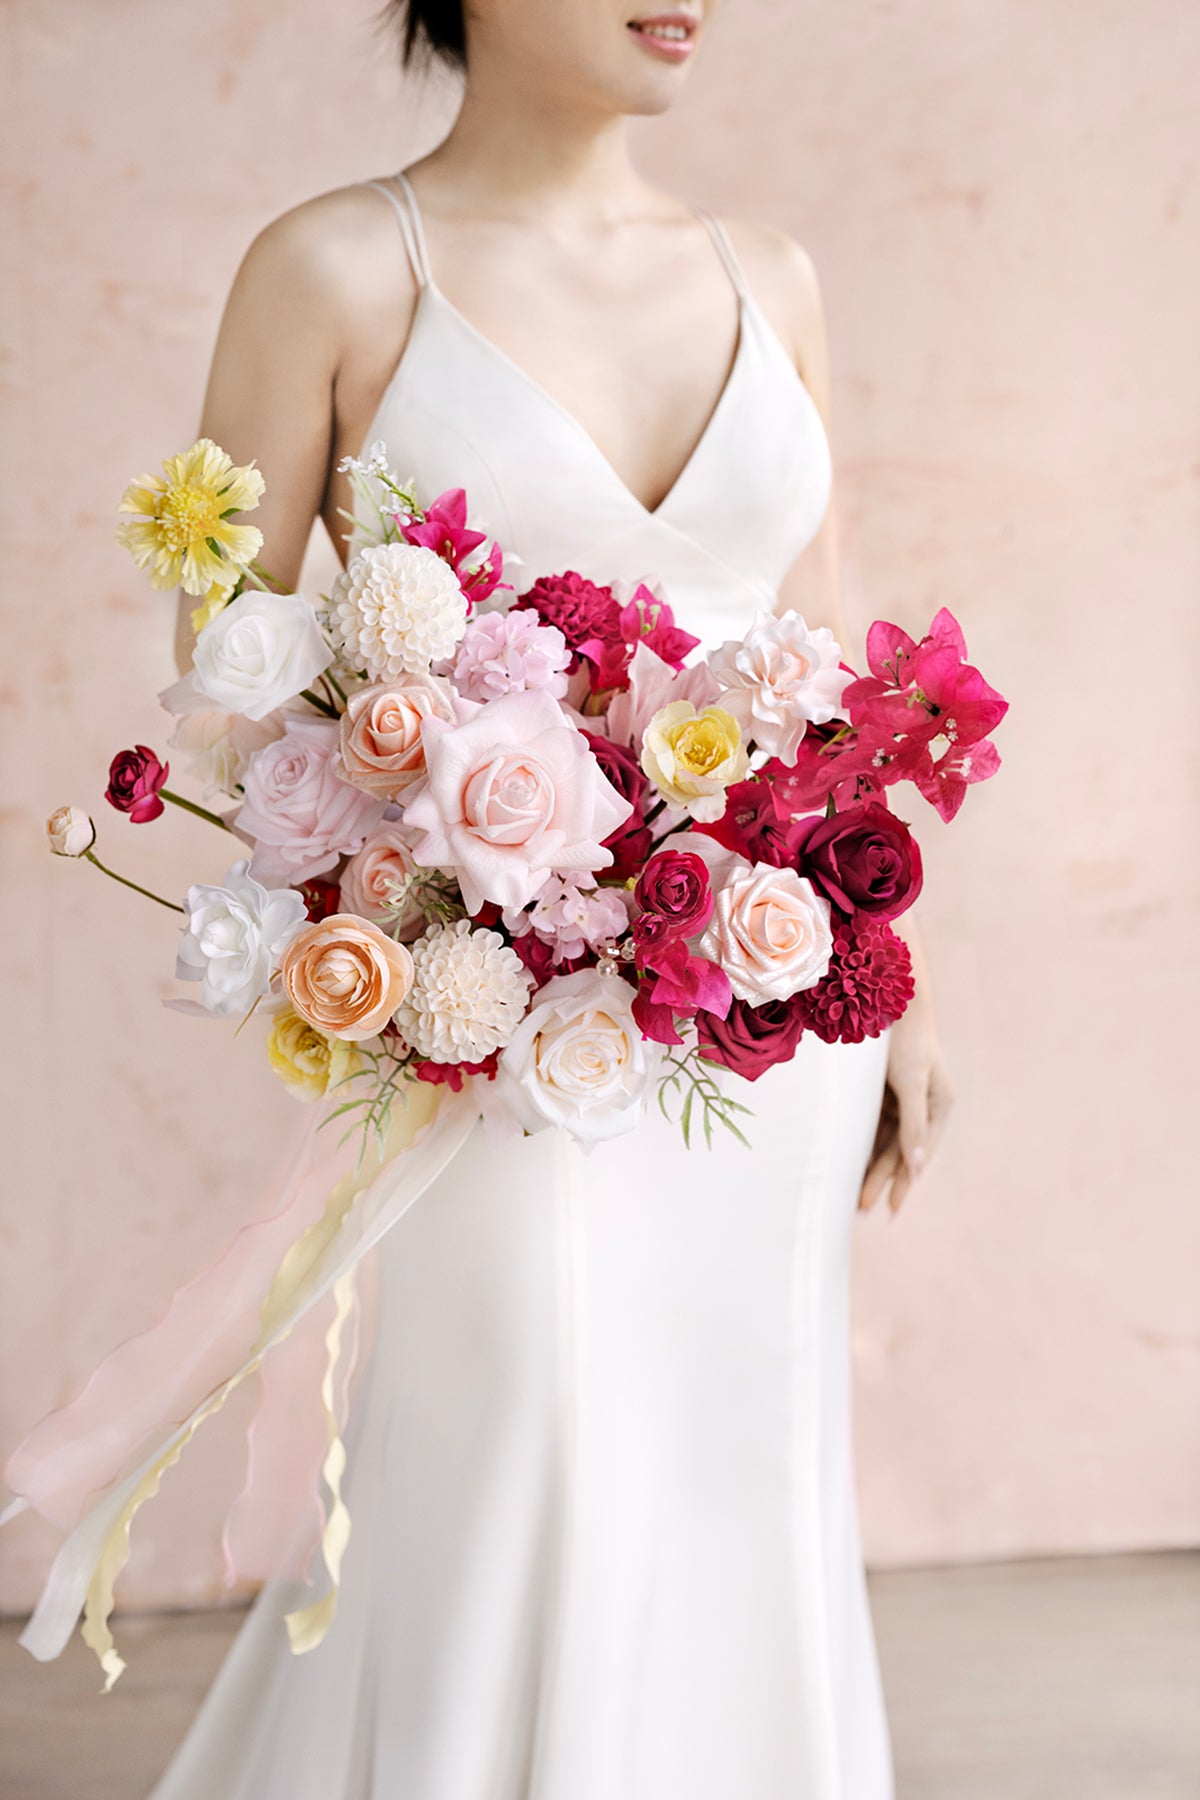 Medium Free-Form Bridal Bouquet in Passionate Pink & Blush